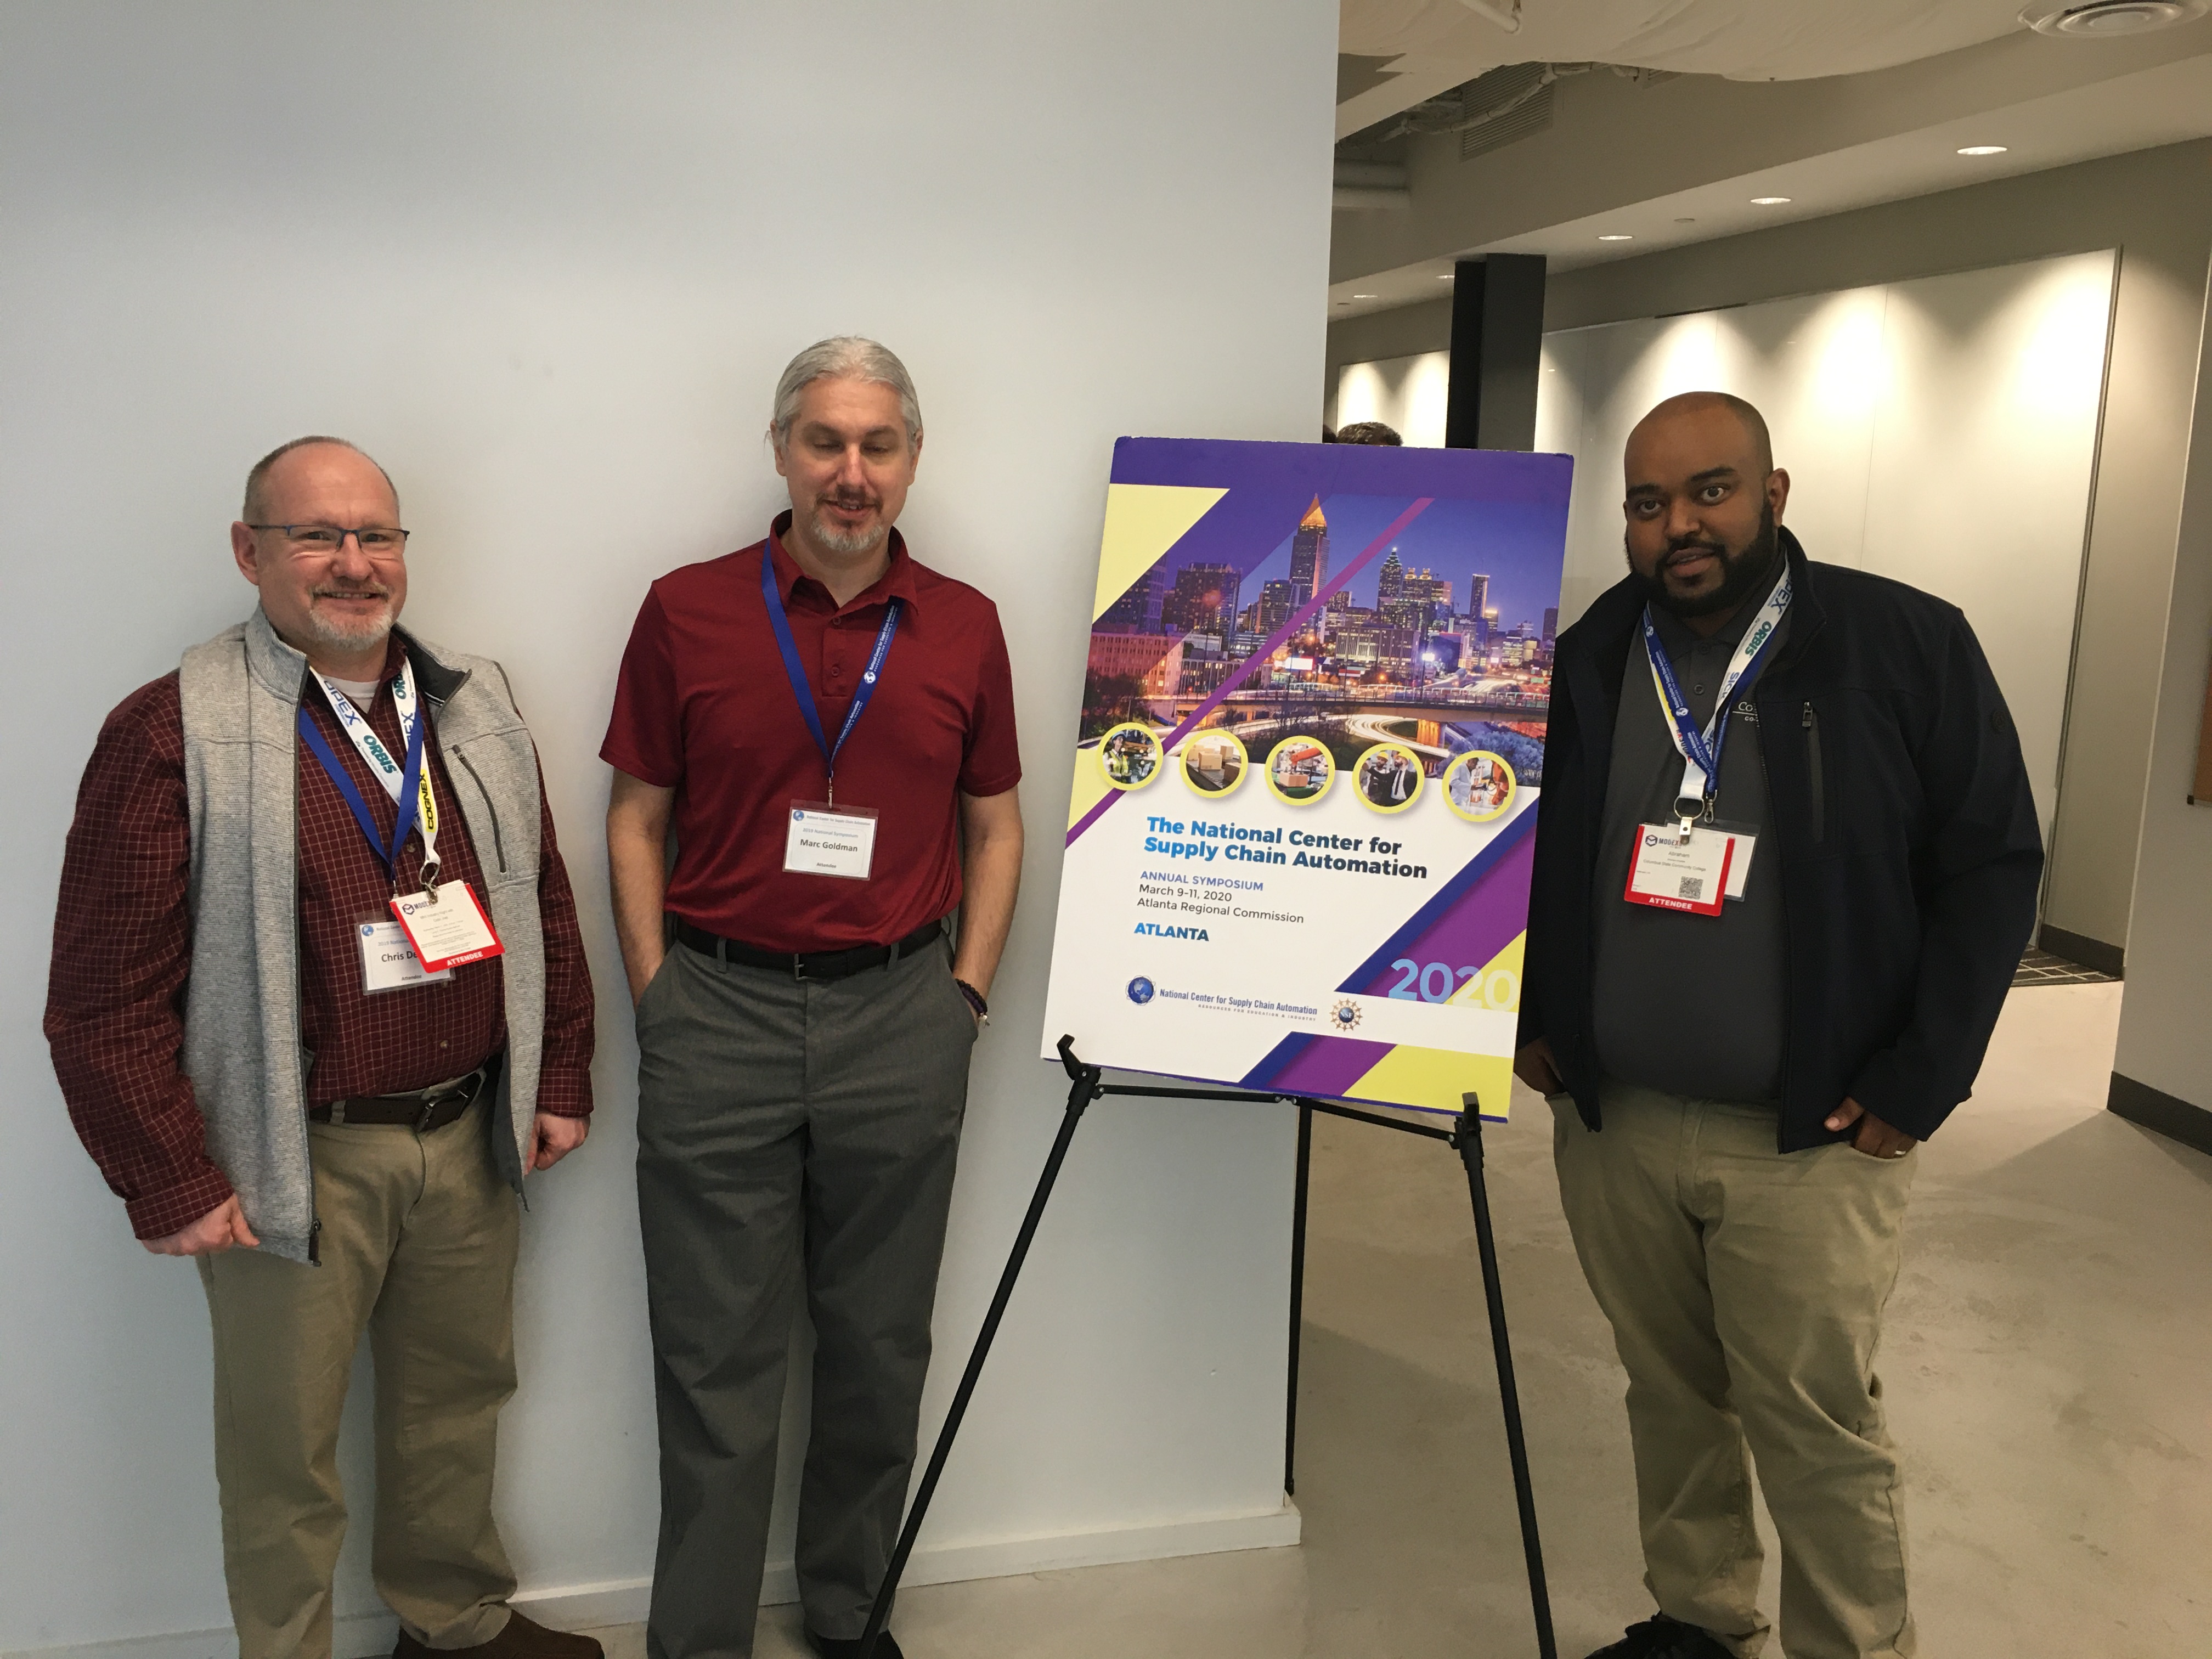 Pictured, LET Instructor Chris Dennis, left, stands next to students Marc Goldman and Abraham Assefaw at the National Center for Supply Chain Automation’s Annual Symposium.